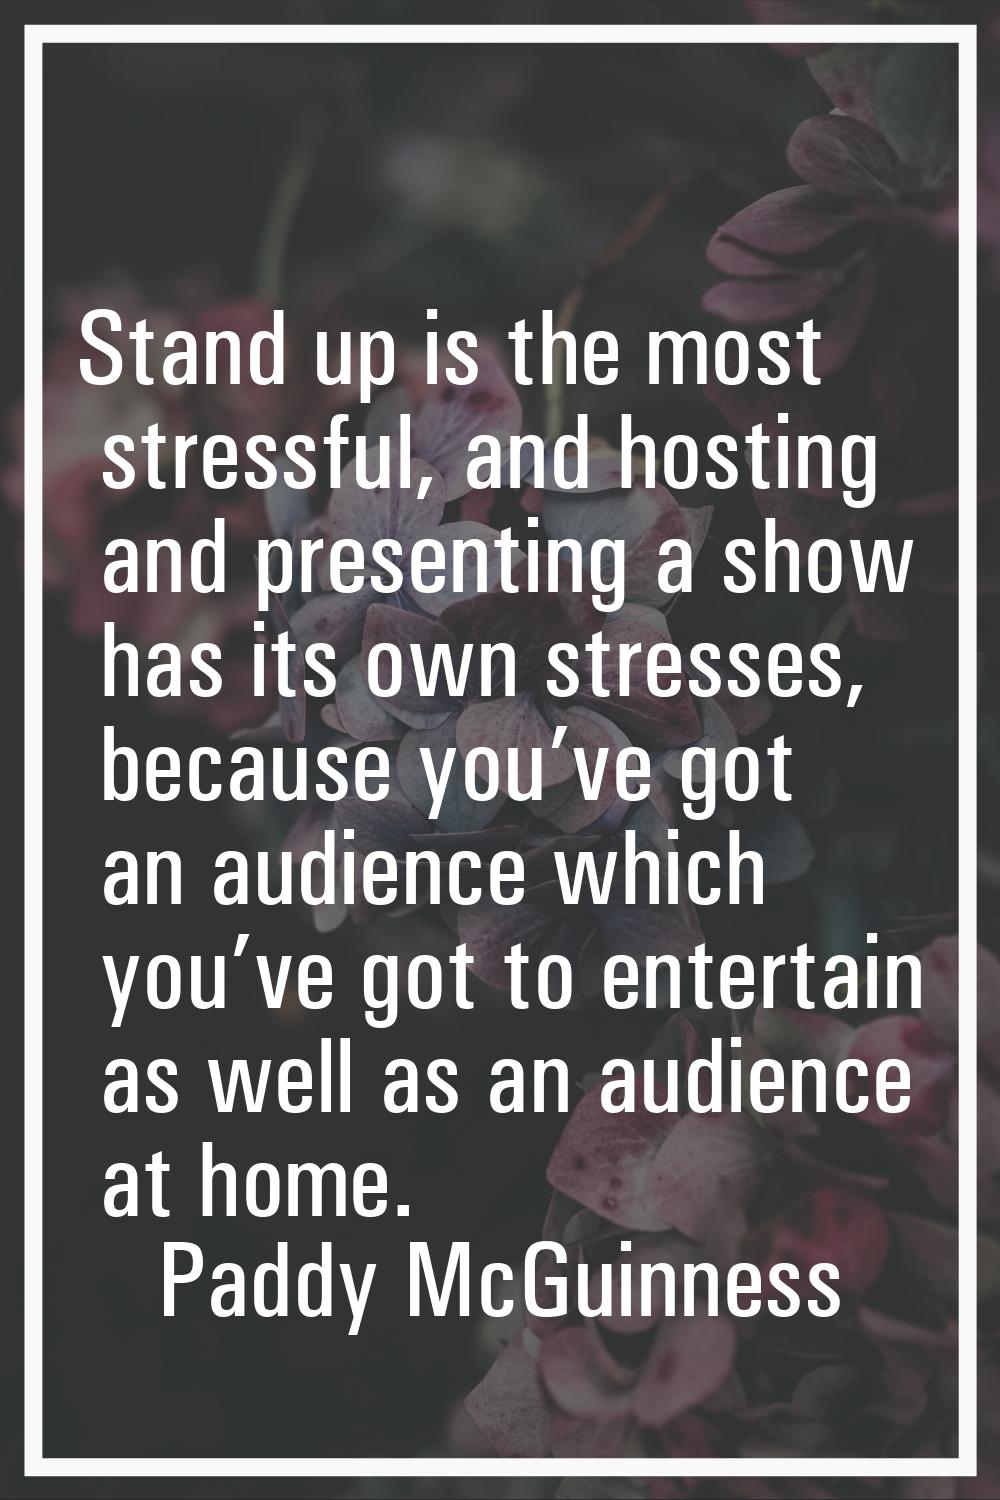 Stand up is the most stressful, and hosting and presenting a show has its own stresses, because you